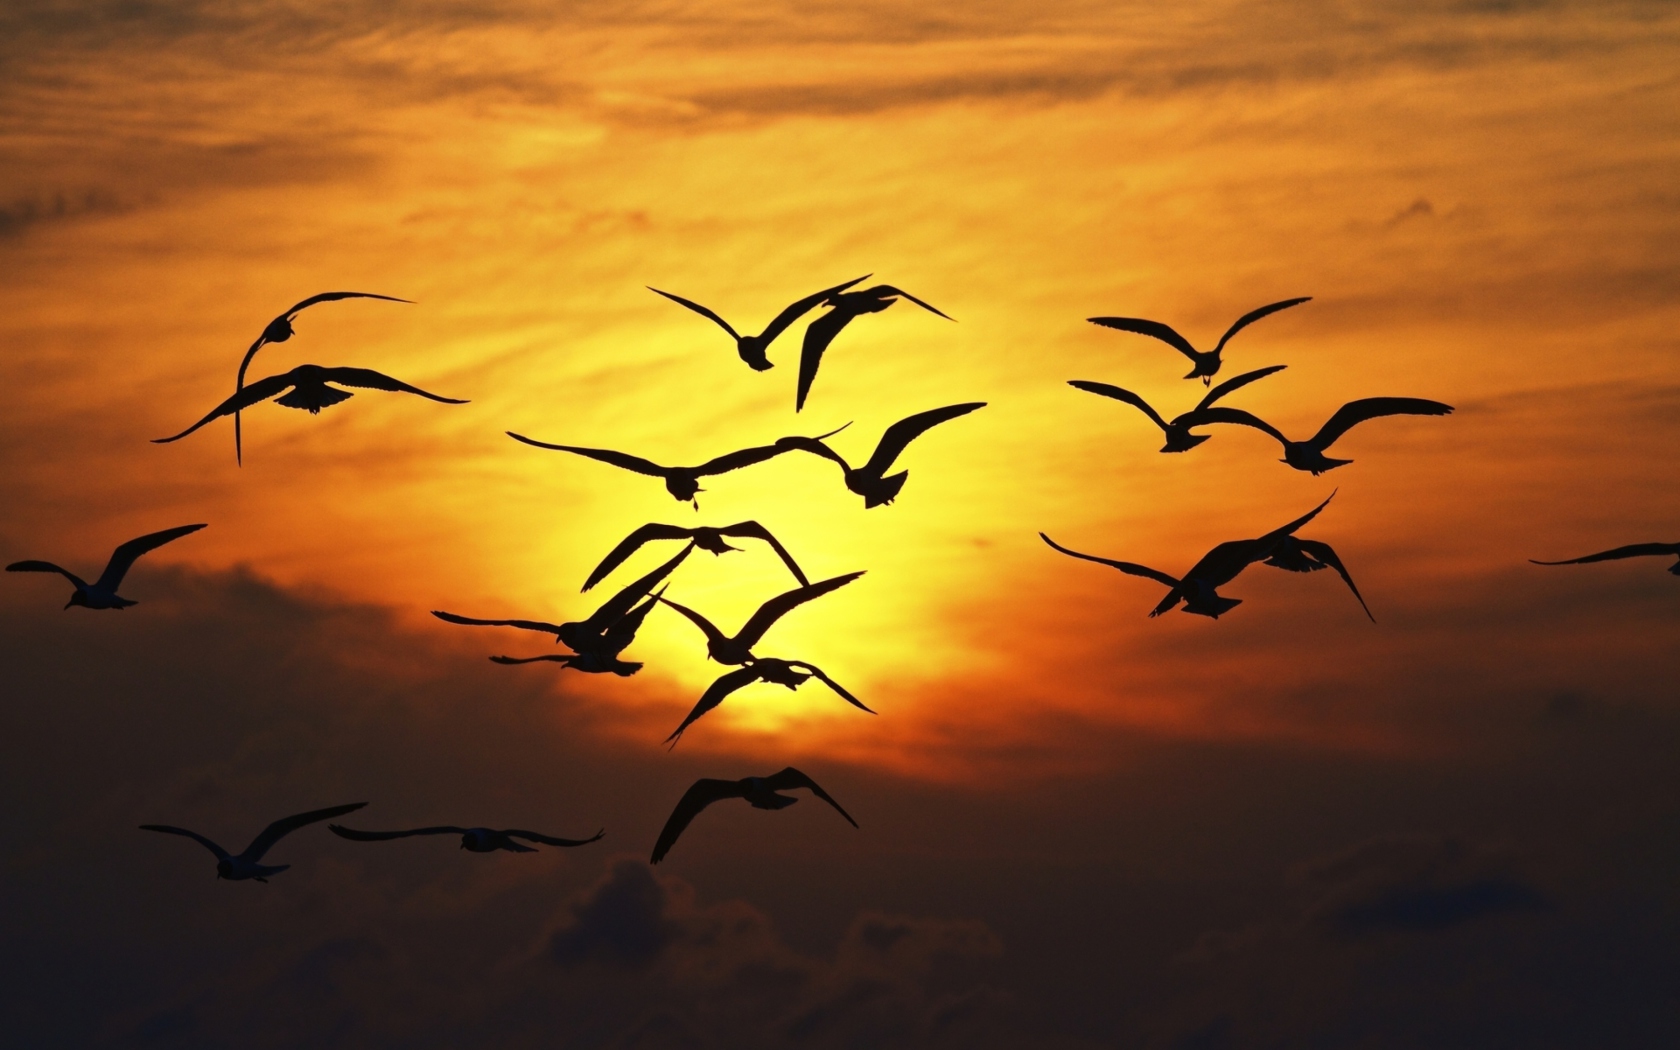 Birds Silhouettes At Sunset wallpaper 1680x1050